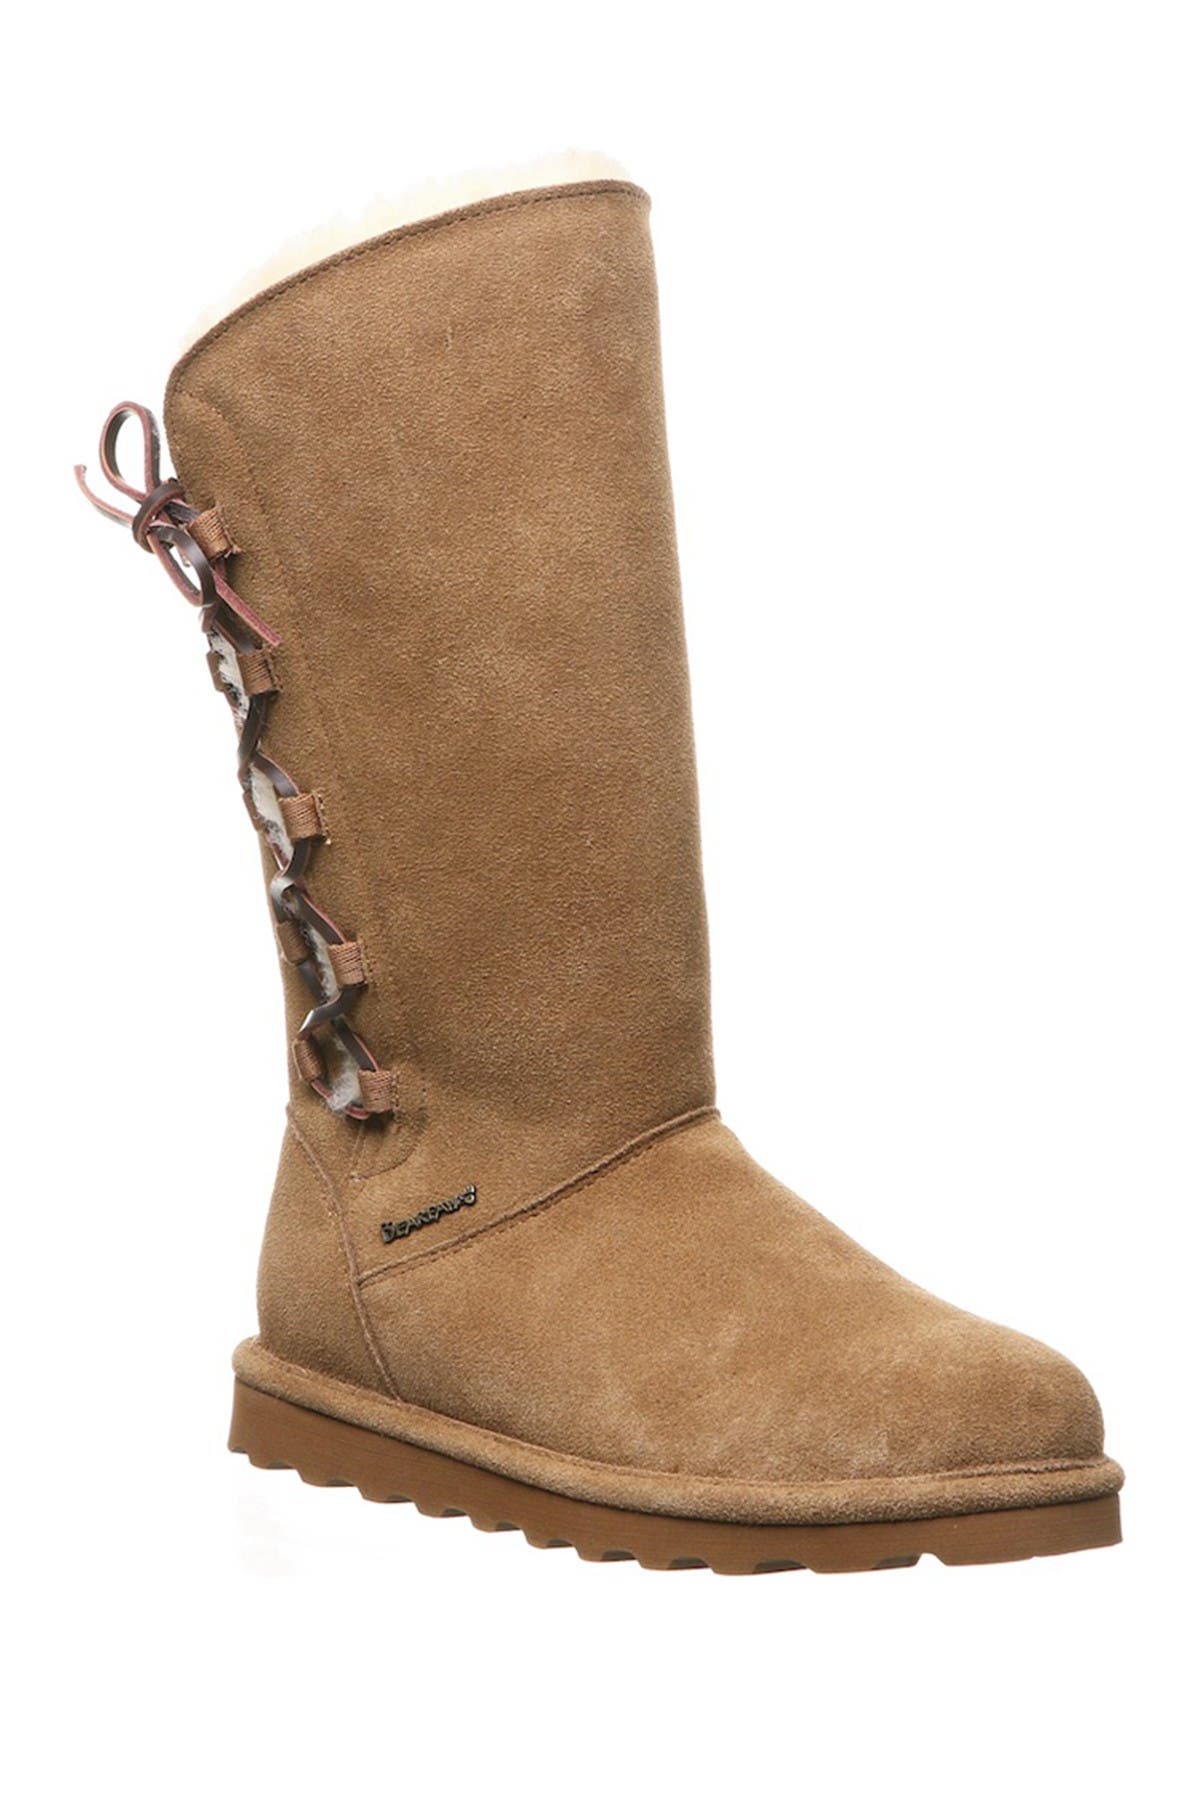 bearpaw boots lace up